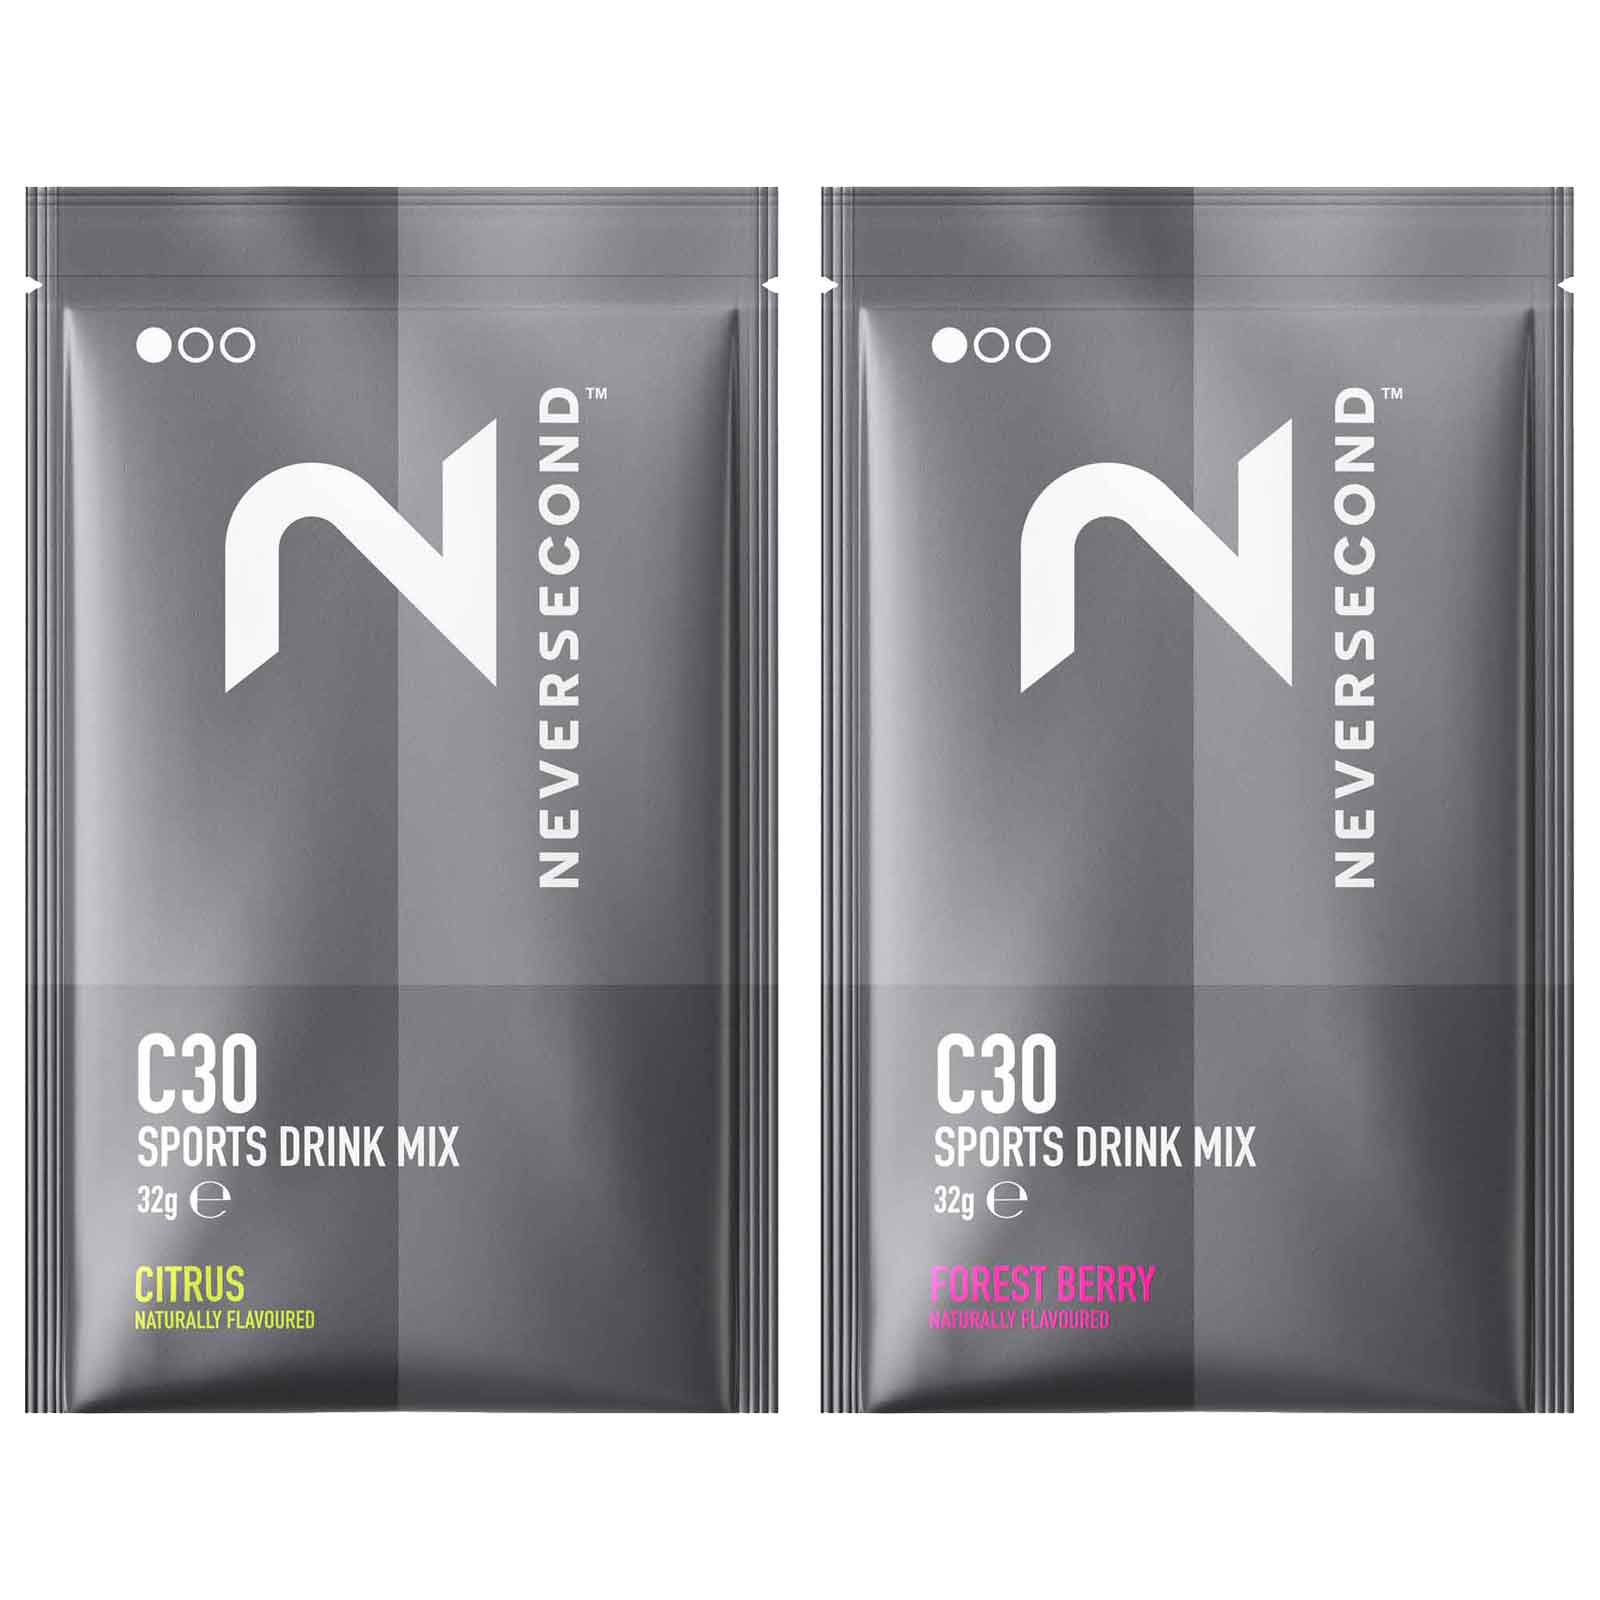 Productfoto van Neversecond C30 Sports Drink Variety Pack - Carbohydrate Beverage Powder - 6x32g